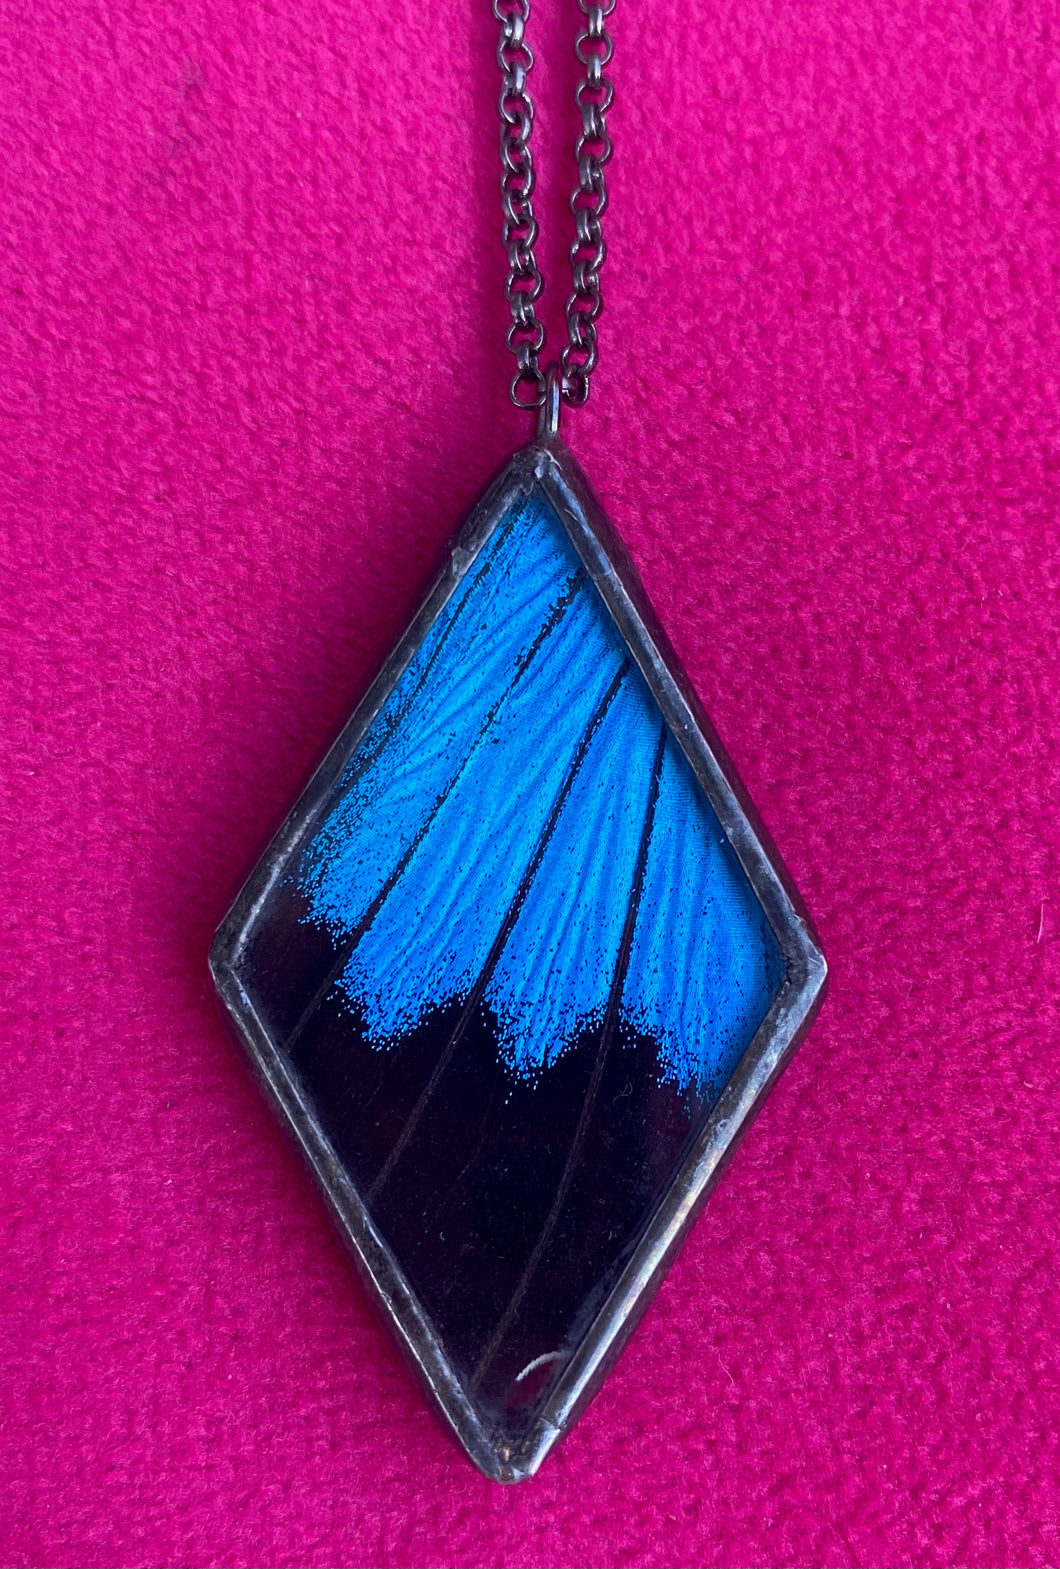 Blue Mountain Swallowtail Necklace made by Dream Wings